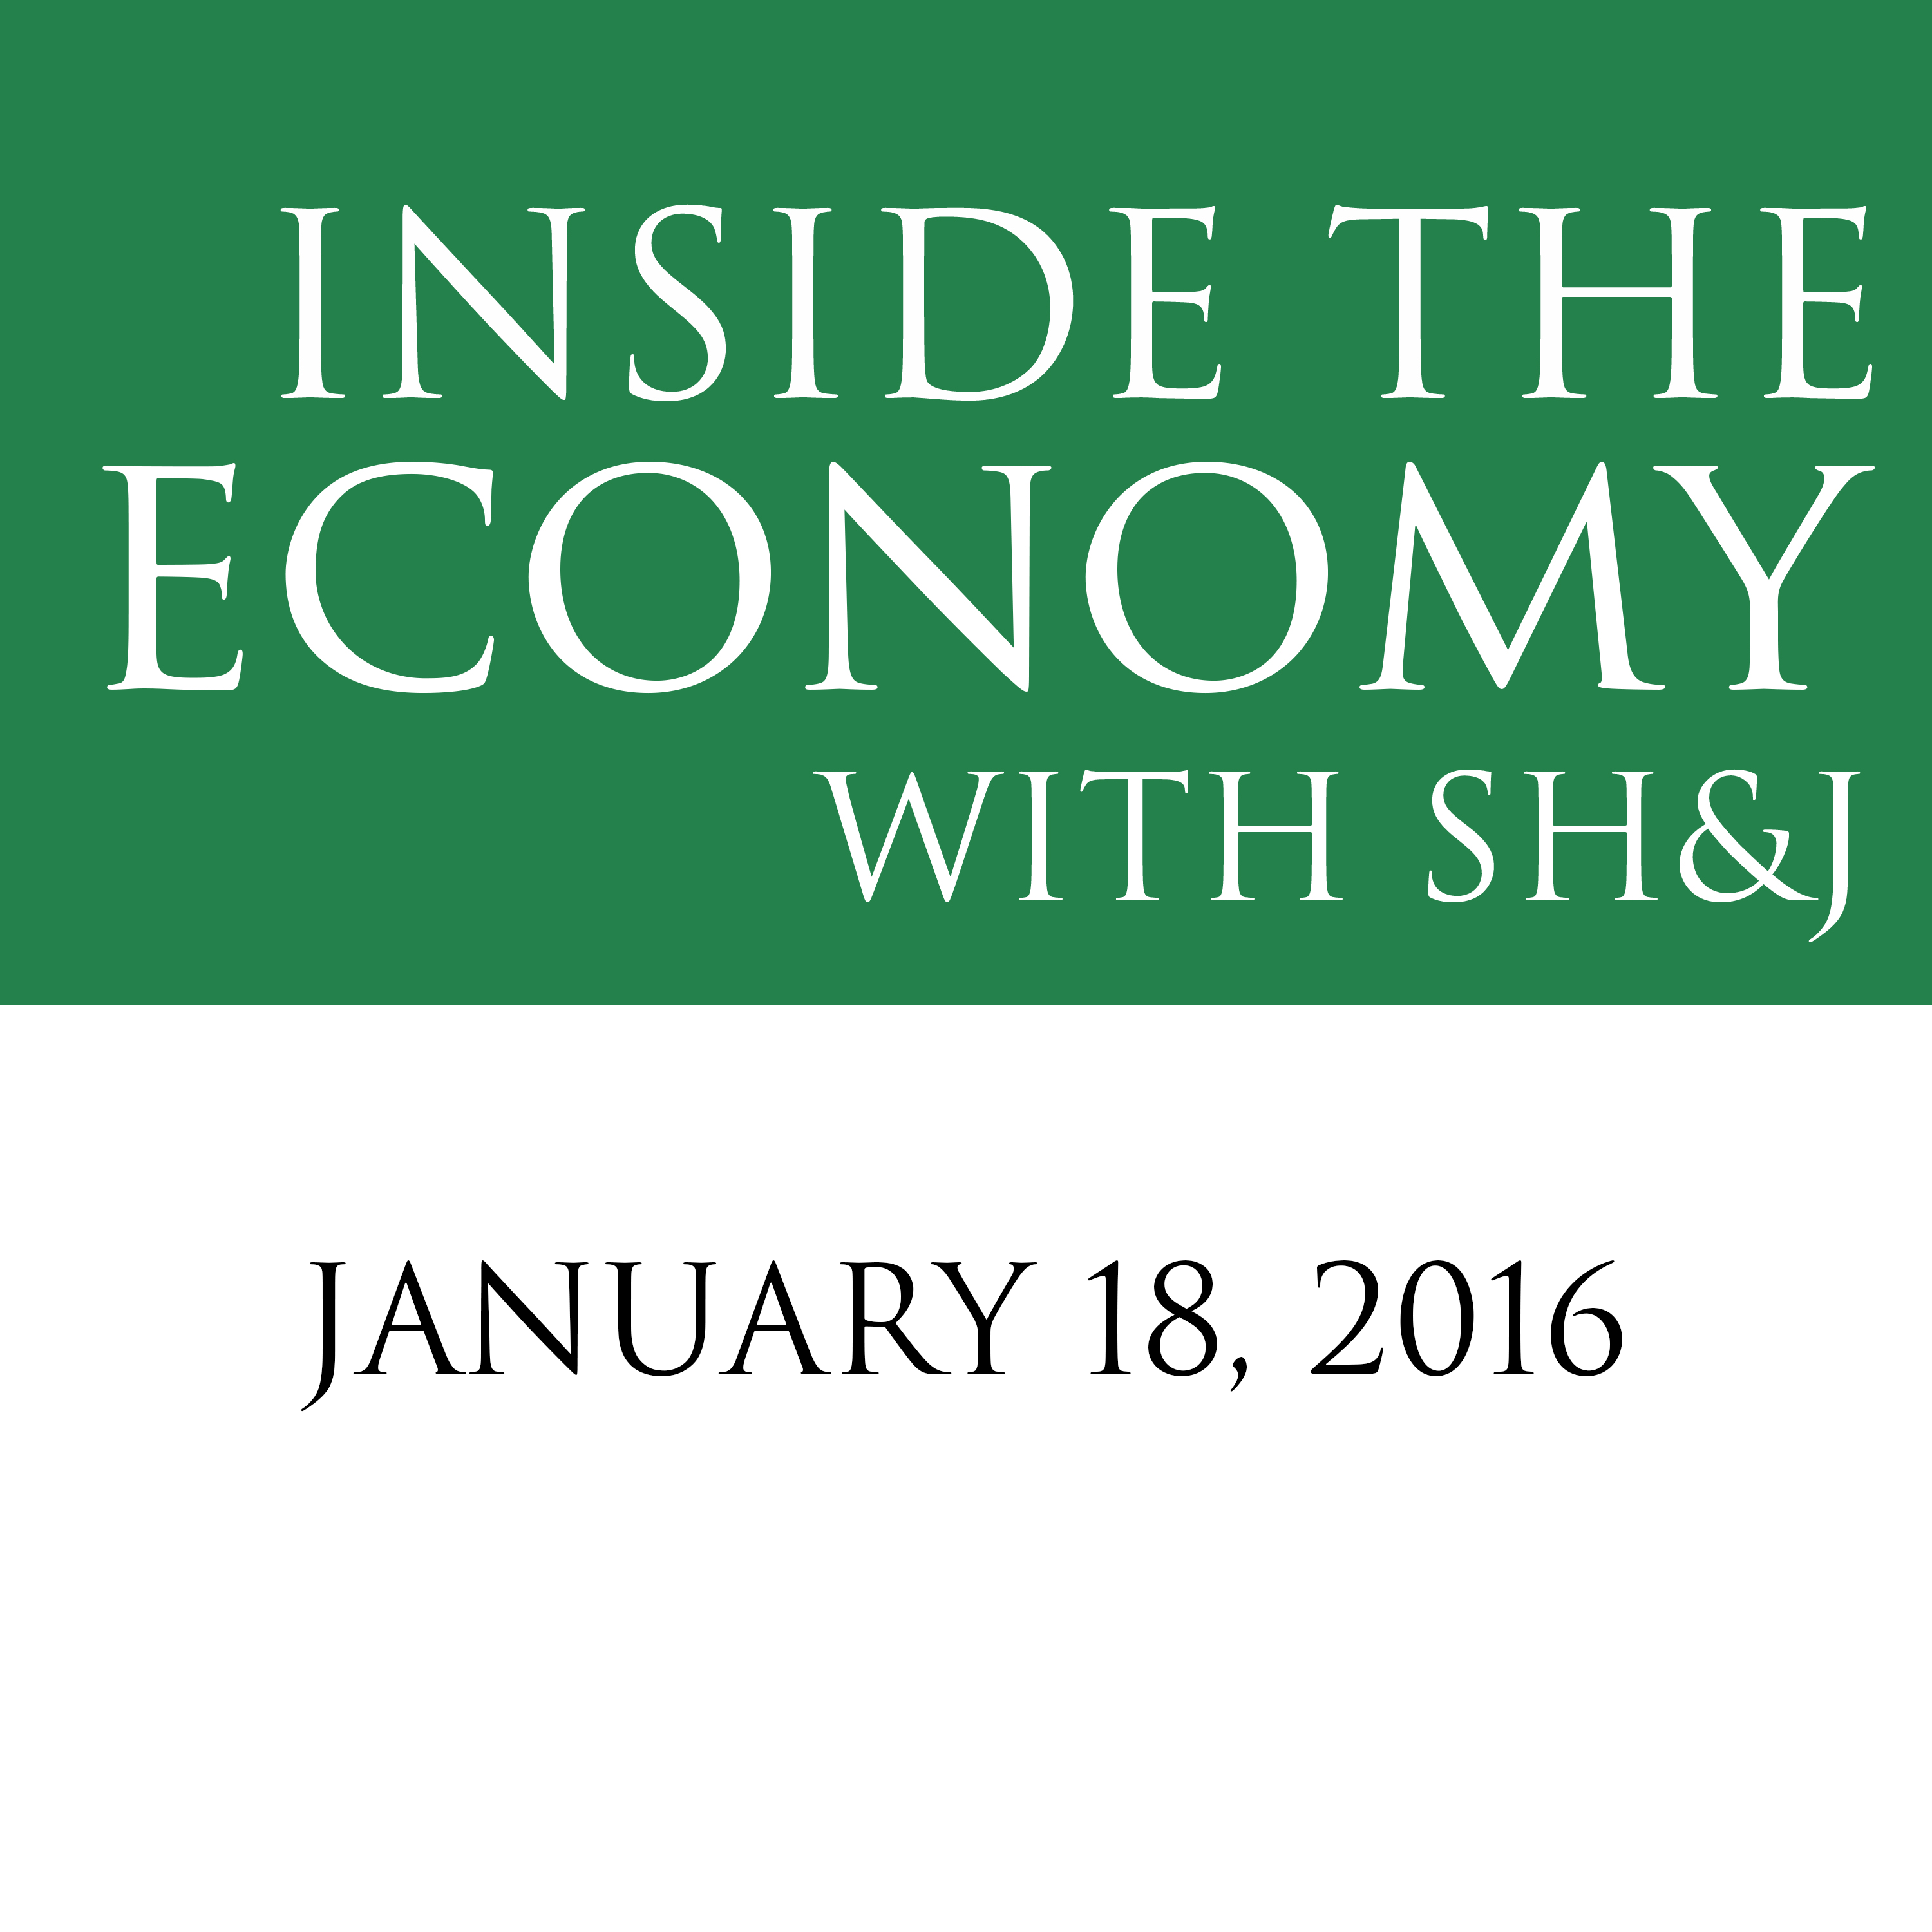 January 18, 2016  --  Inside the Economy With SH&J